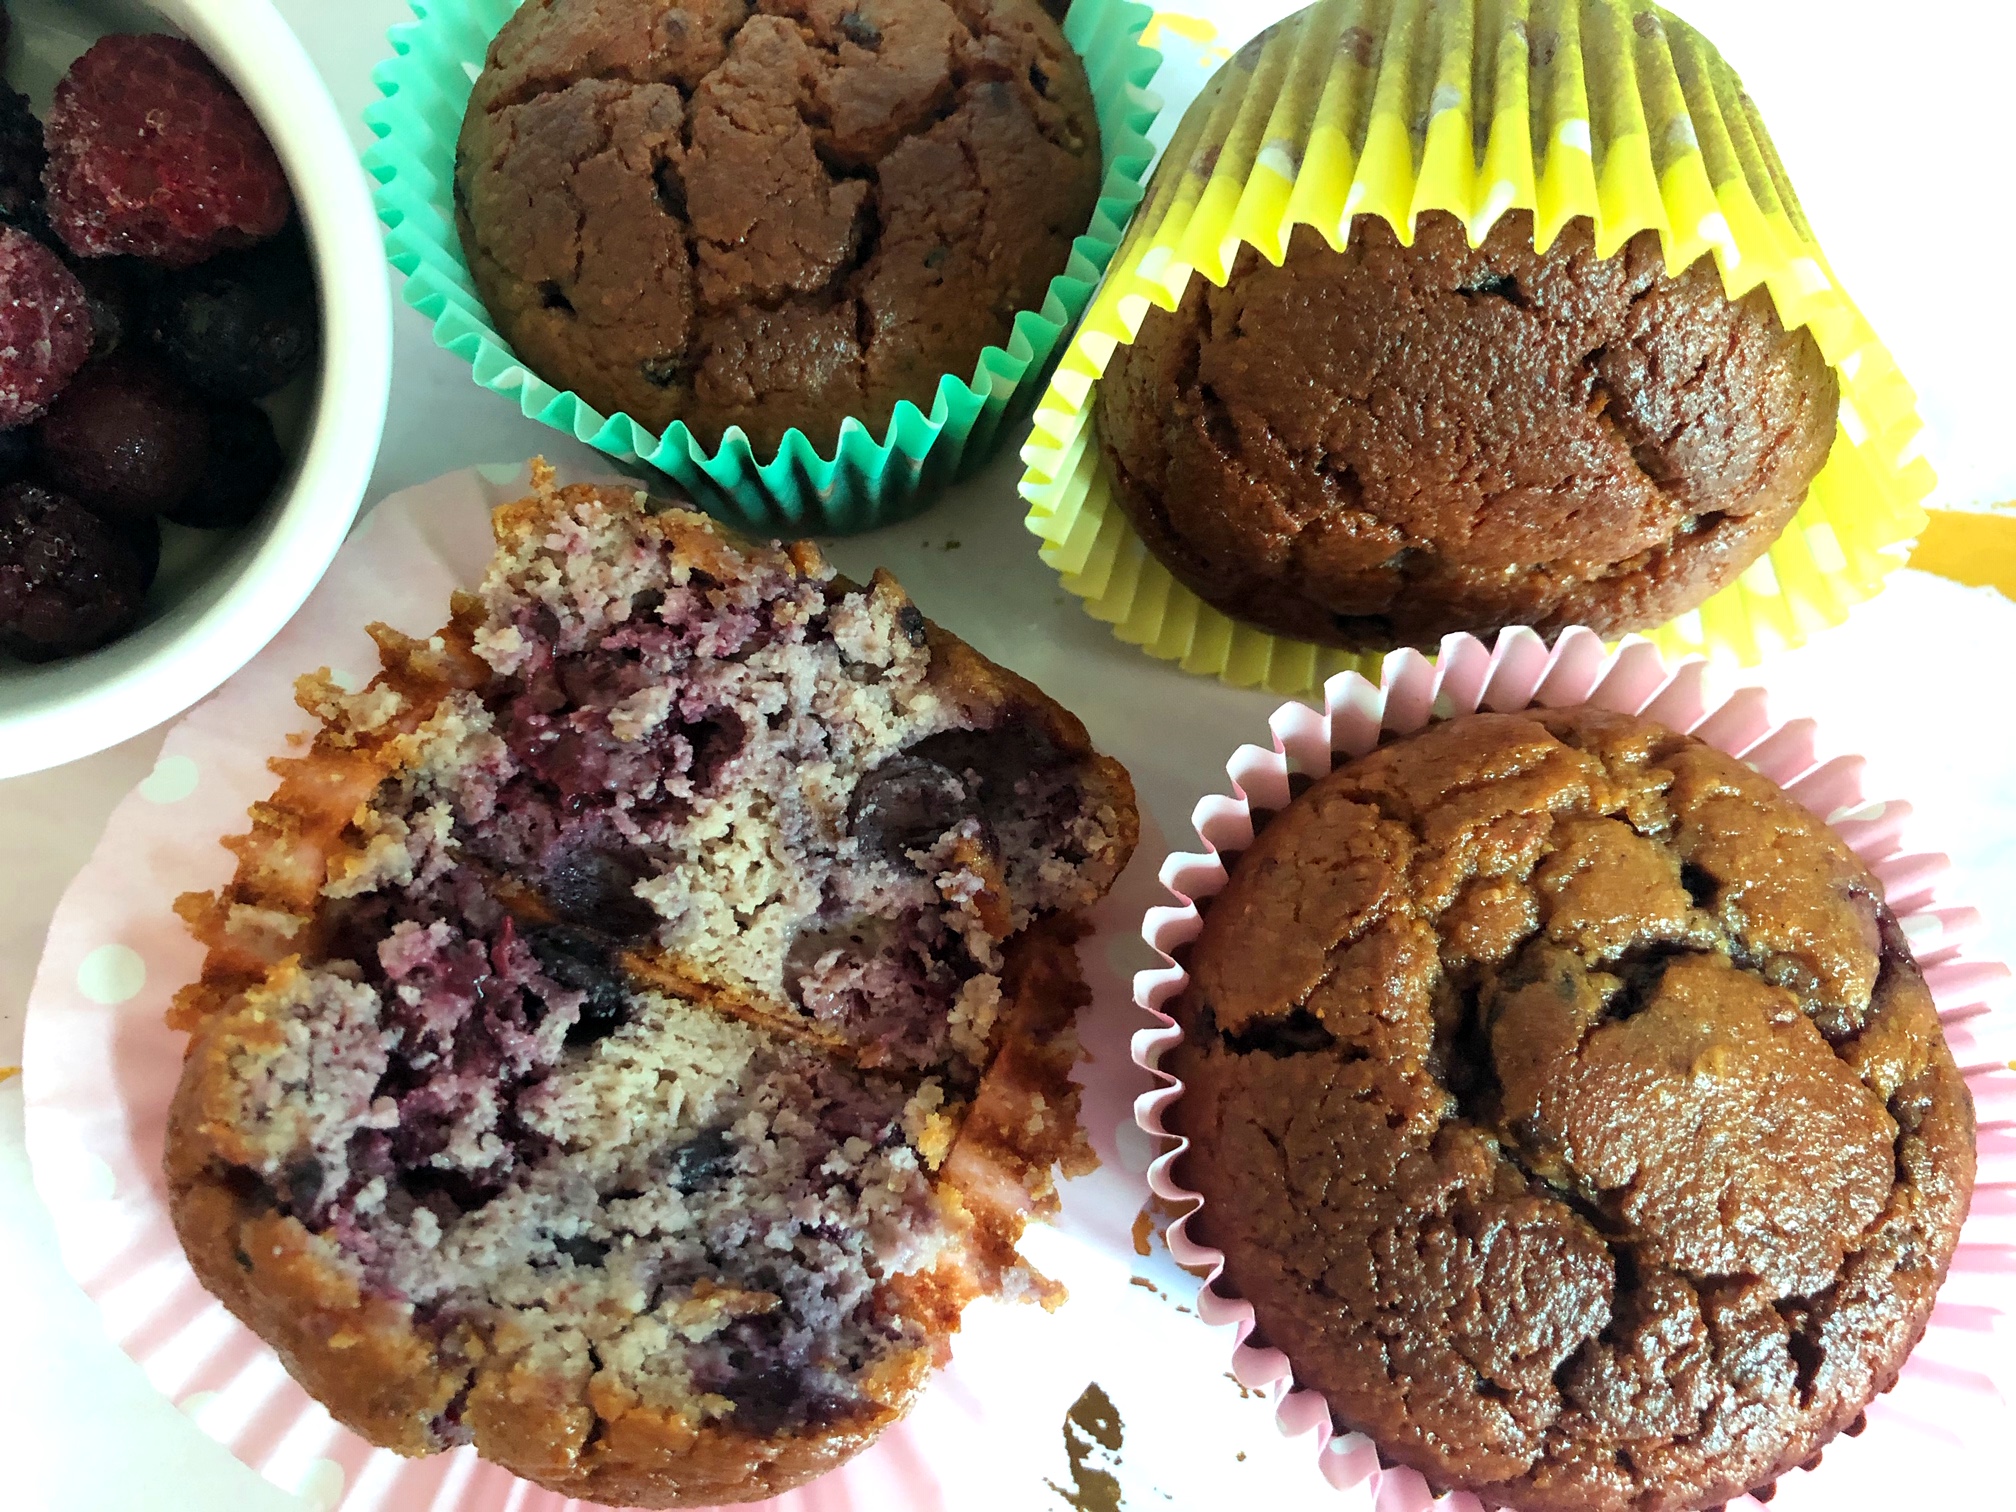 Mixed Berry and Yoghurt Muffins